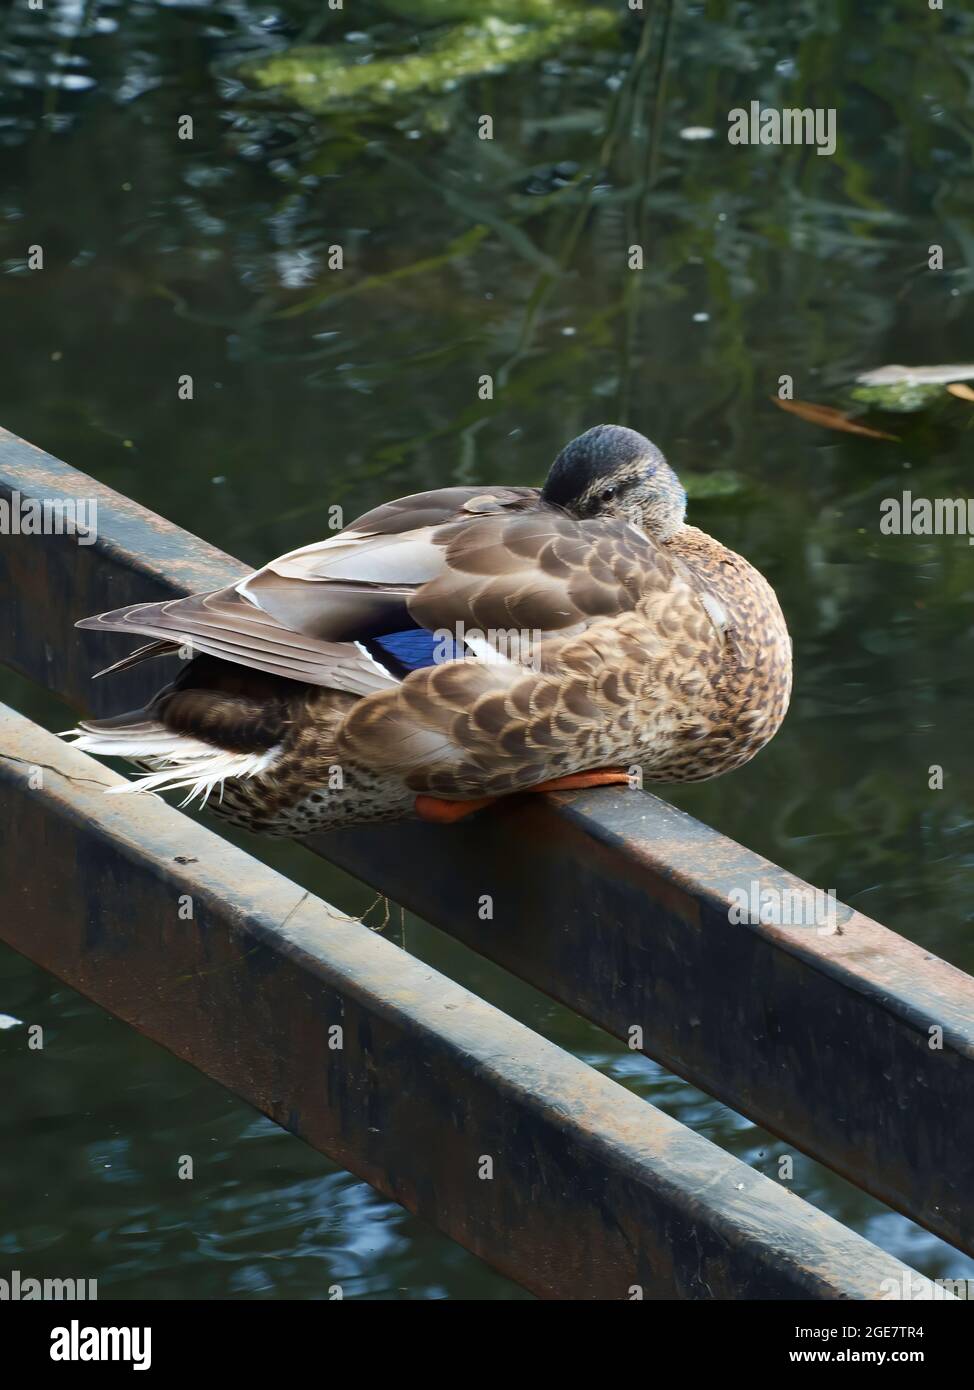 A shy / coy / playful female mallard on a disused bridge support peeks out, looking directly to camera from behind her wing. Stock Photo